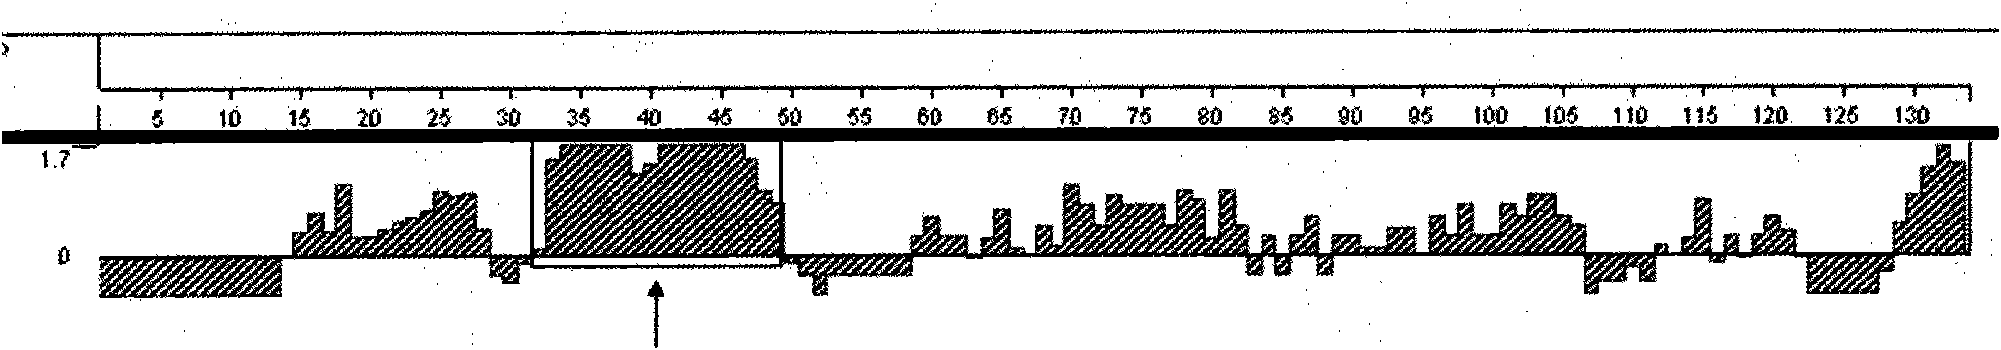 Recombinant human FSHR-57 polypeptide protein and preparation method and application thereof